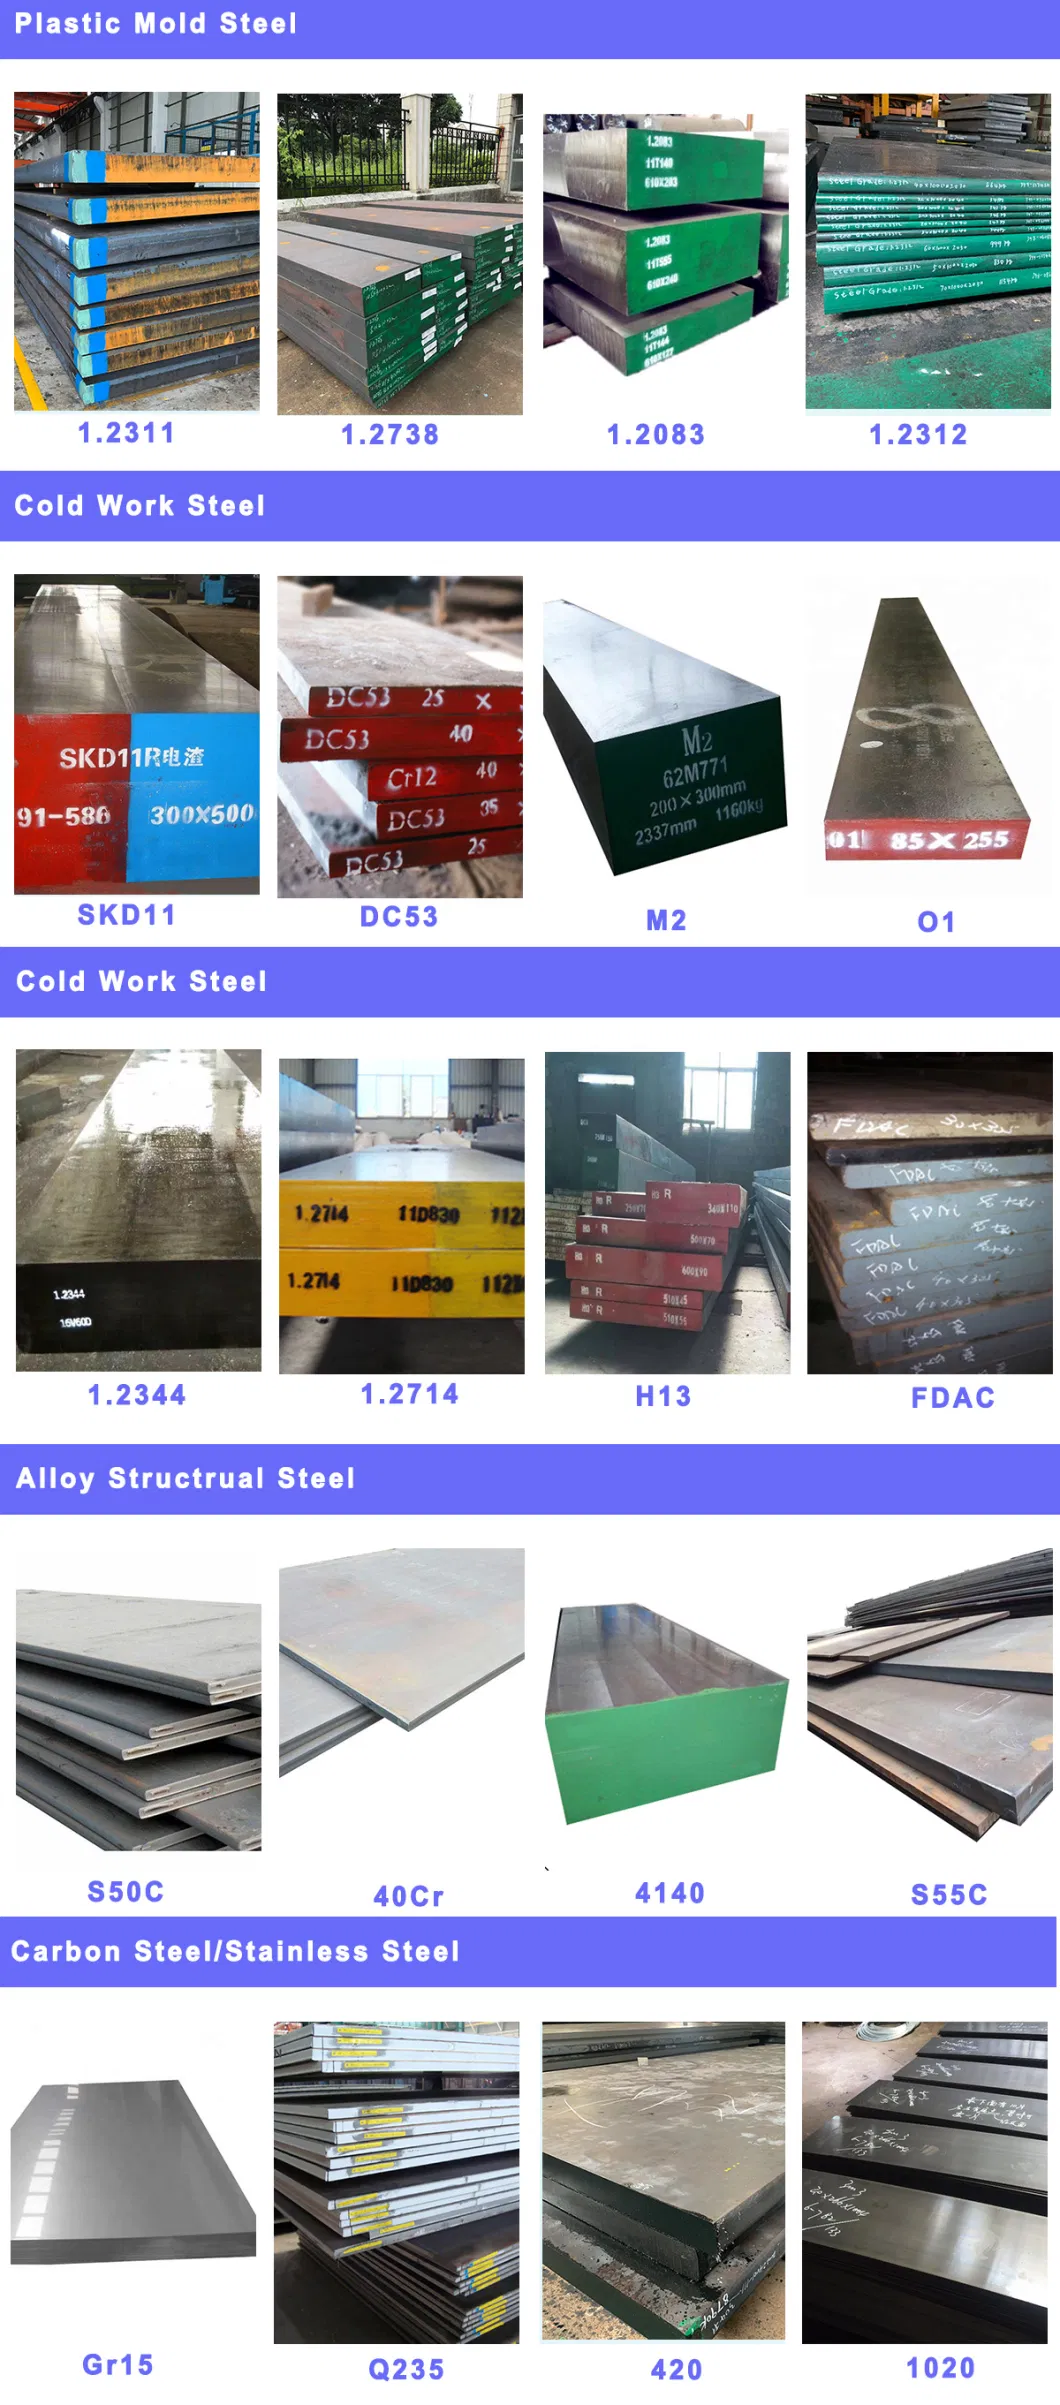 Deluxe Tool Steel and Alloy Plates O1 Precision Ground Flat Sks3 1.2510 Tool Steel Flat Bar